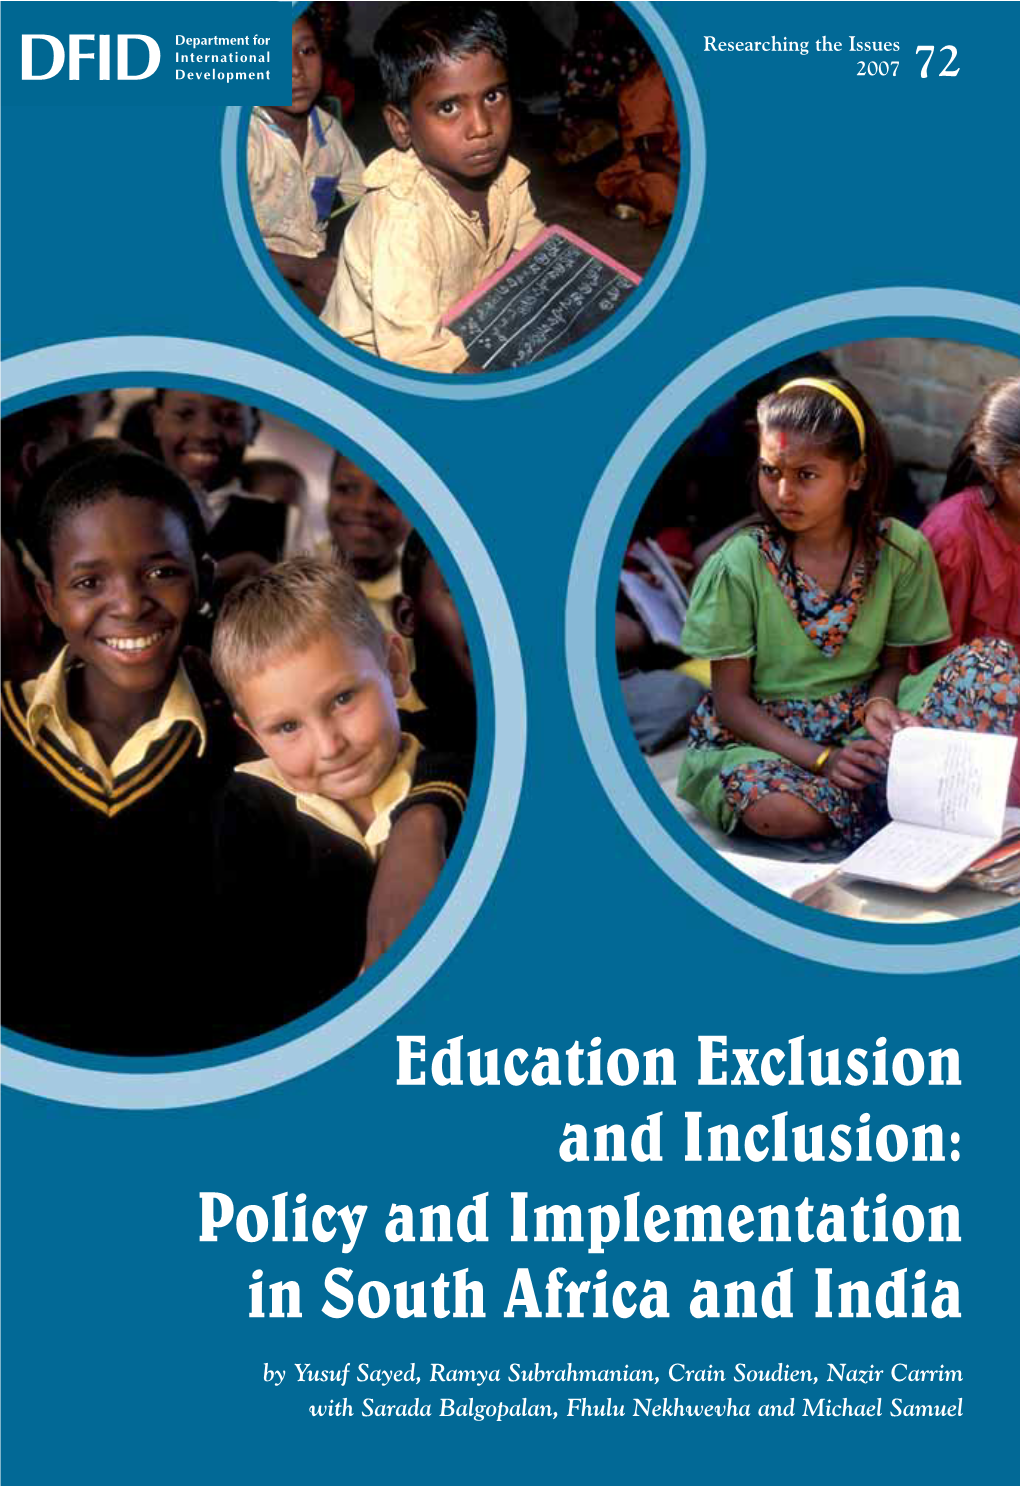 Education Exclusion and Inclusion: Policy and Implementation in South Africa and India